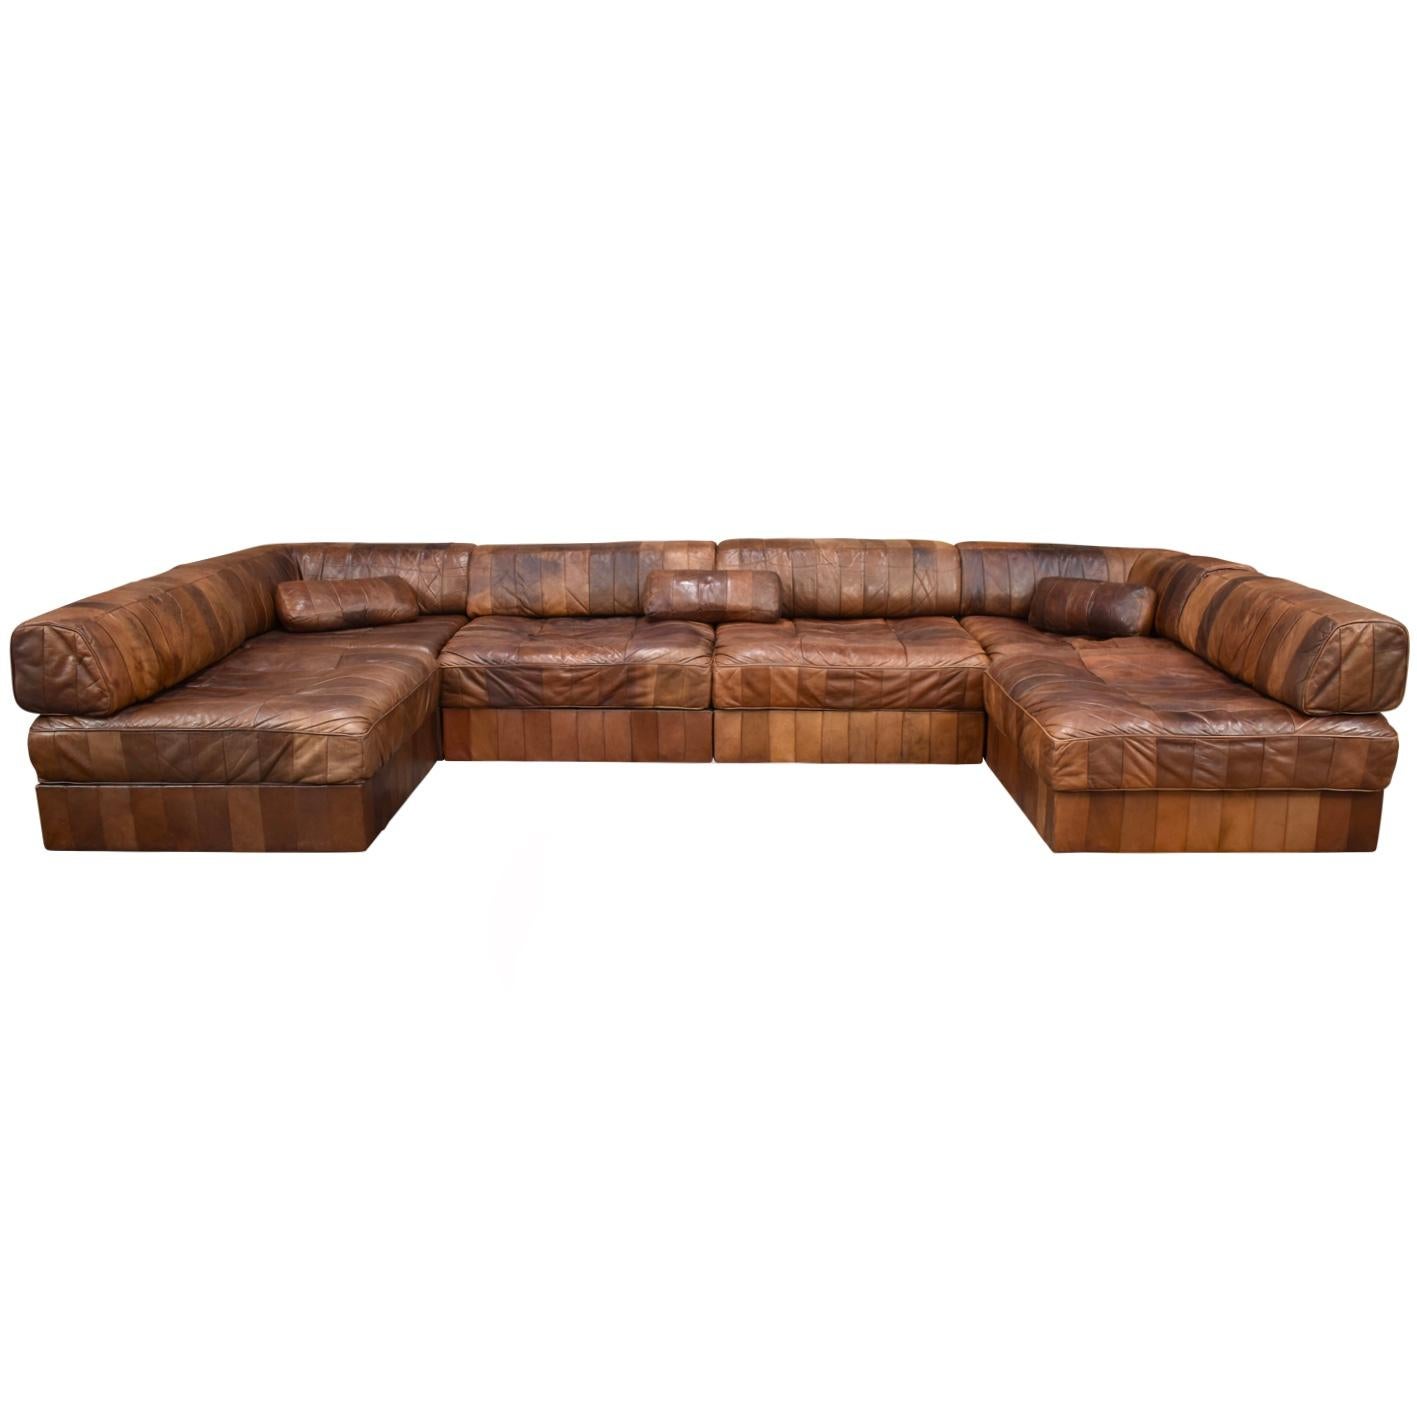 Six element DS88 patchwork sofa by De Sede. The sofa has six sections that can be set-up in different ways. Absolutely gorgeous patinated tan, cognac, chocolate brown color aniline leather. In good and completely original condition. 

– 6 elements